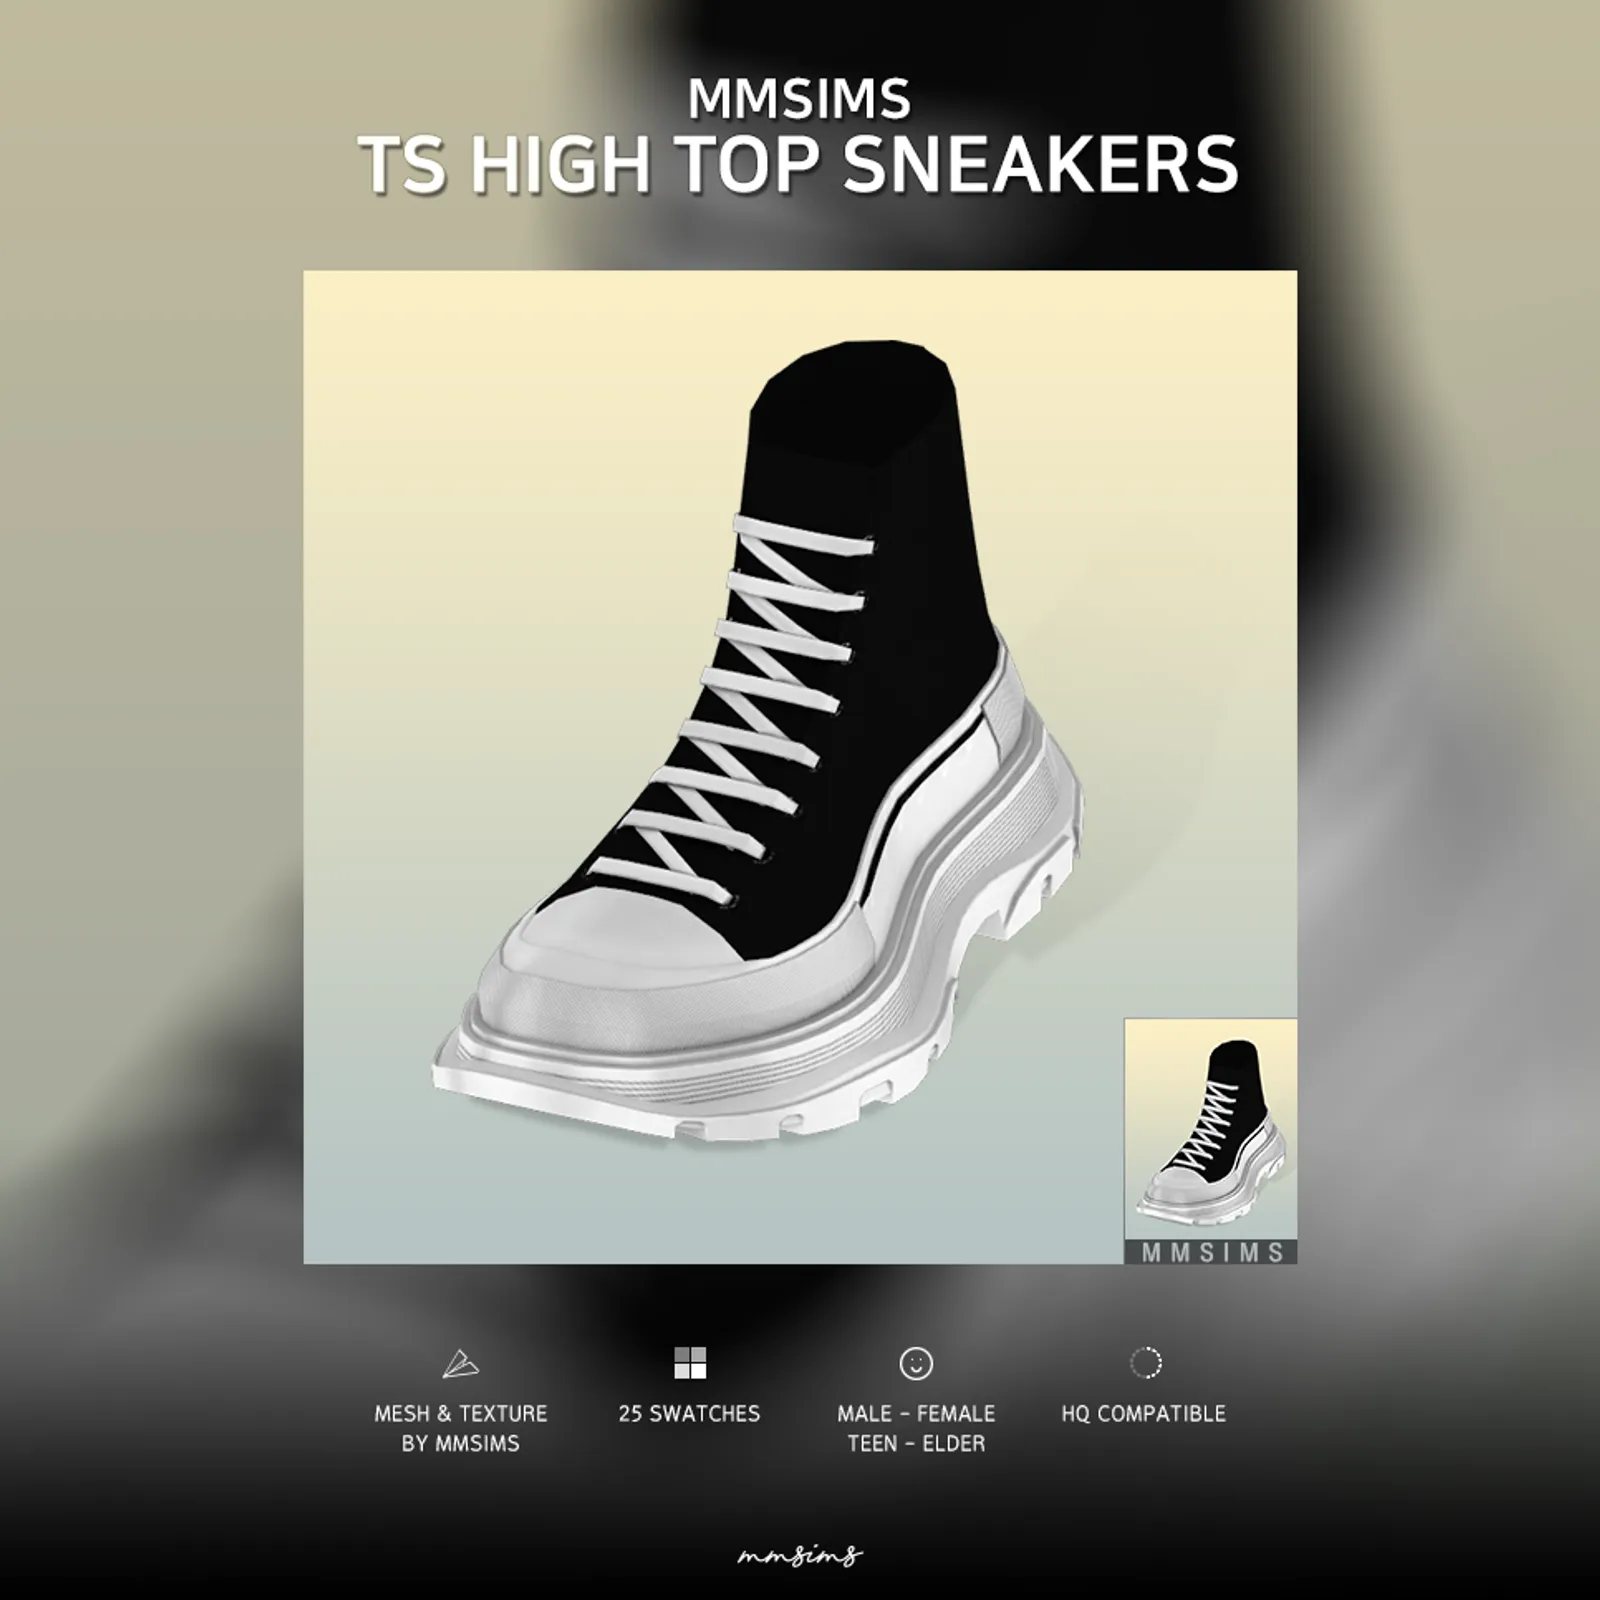 MMSIMS TS high top sneakers